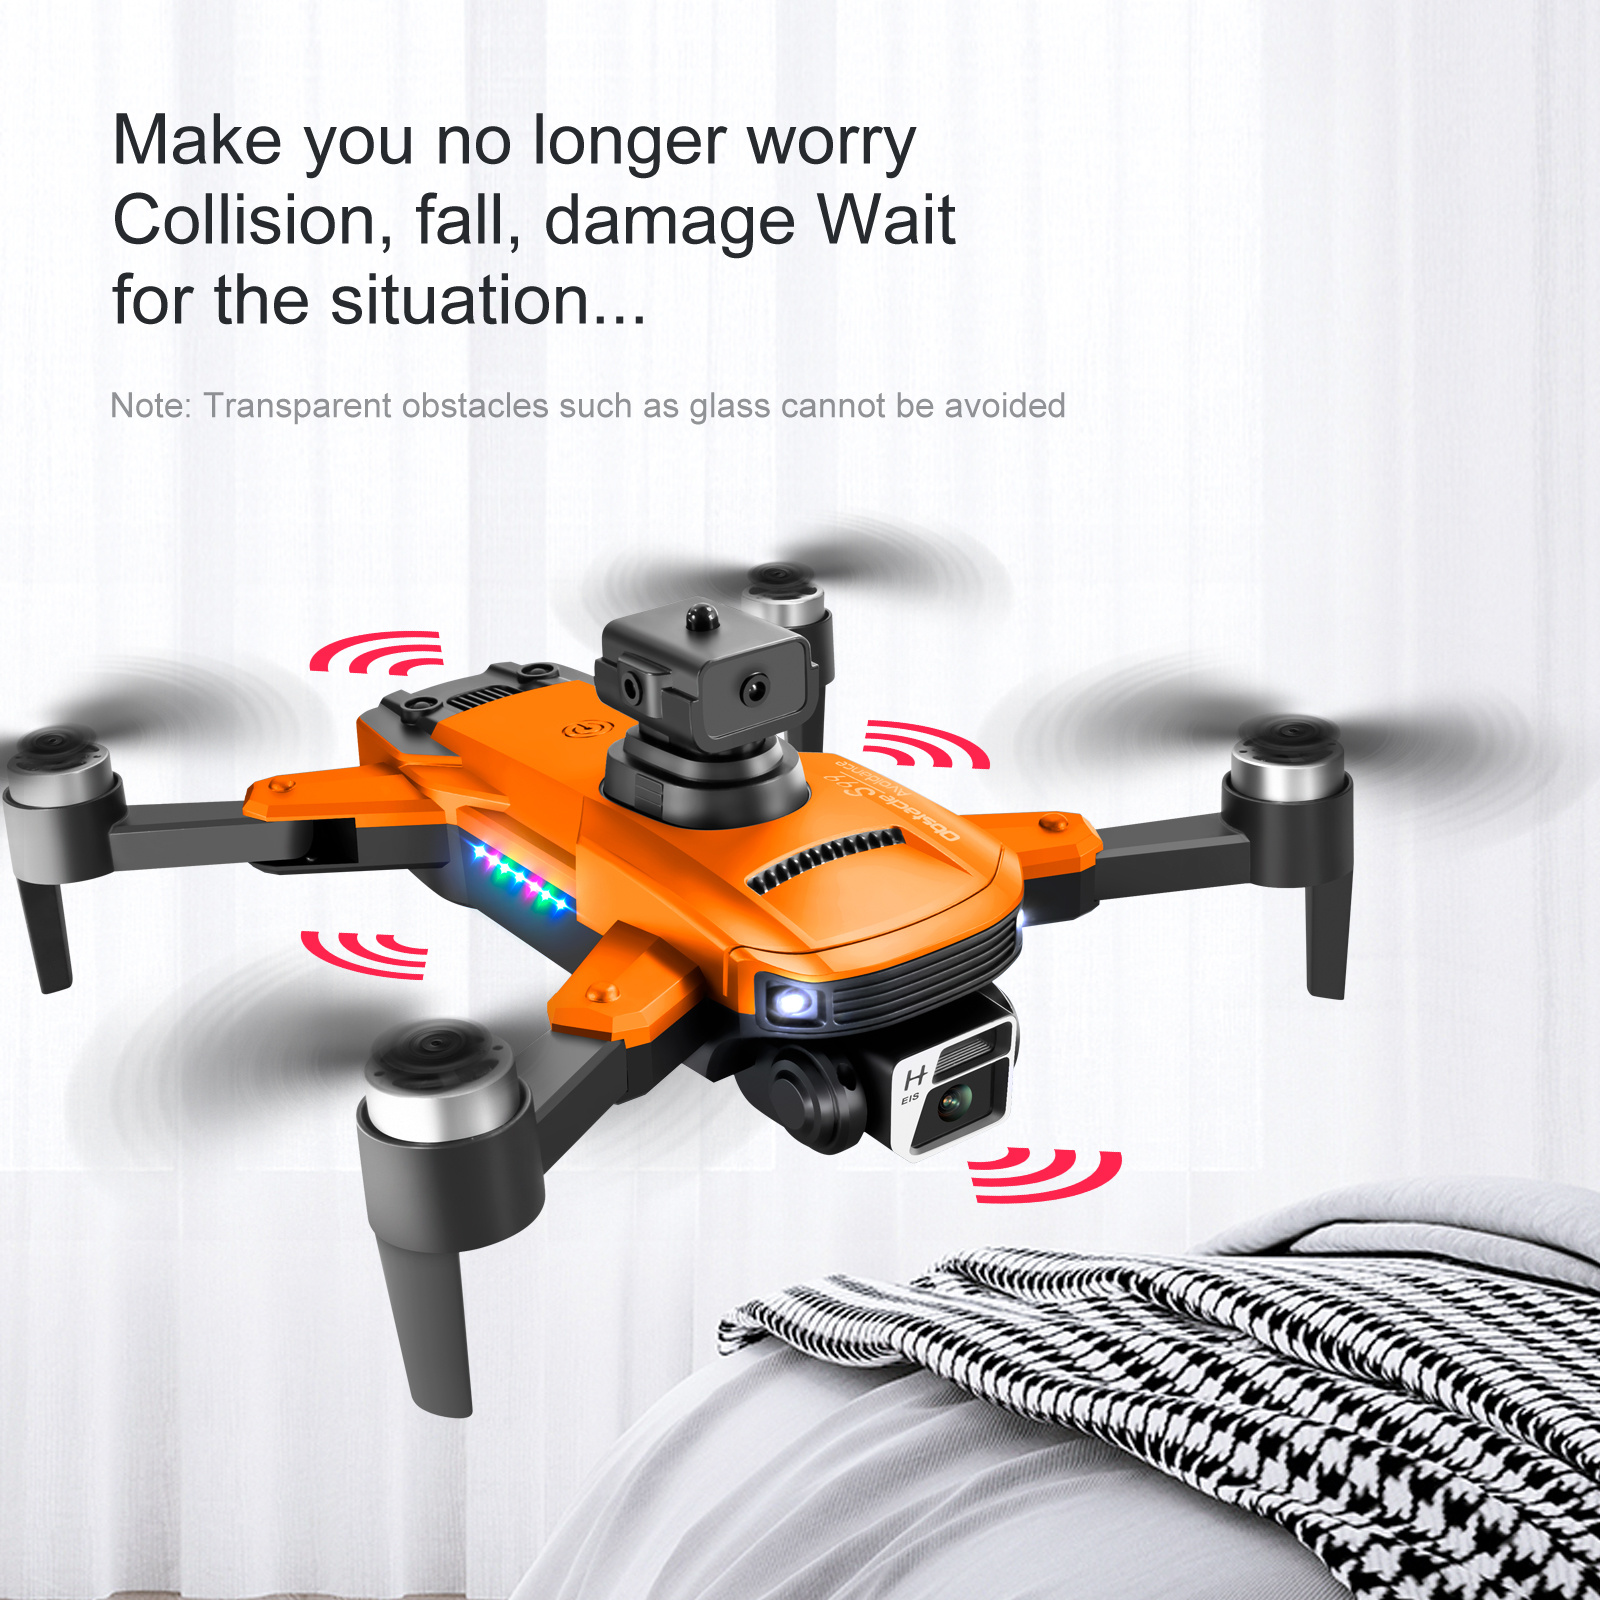 paxa s99 5g gps drone led colored lights hd real time aerial photography obstacle avoidance quadrotor helicopter rc distance 100m uav details 5